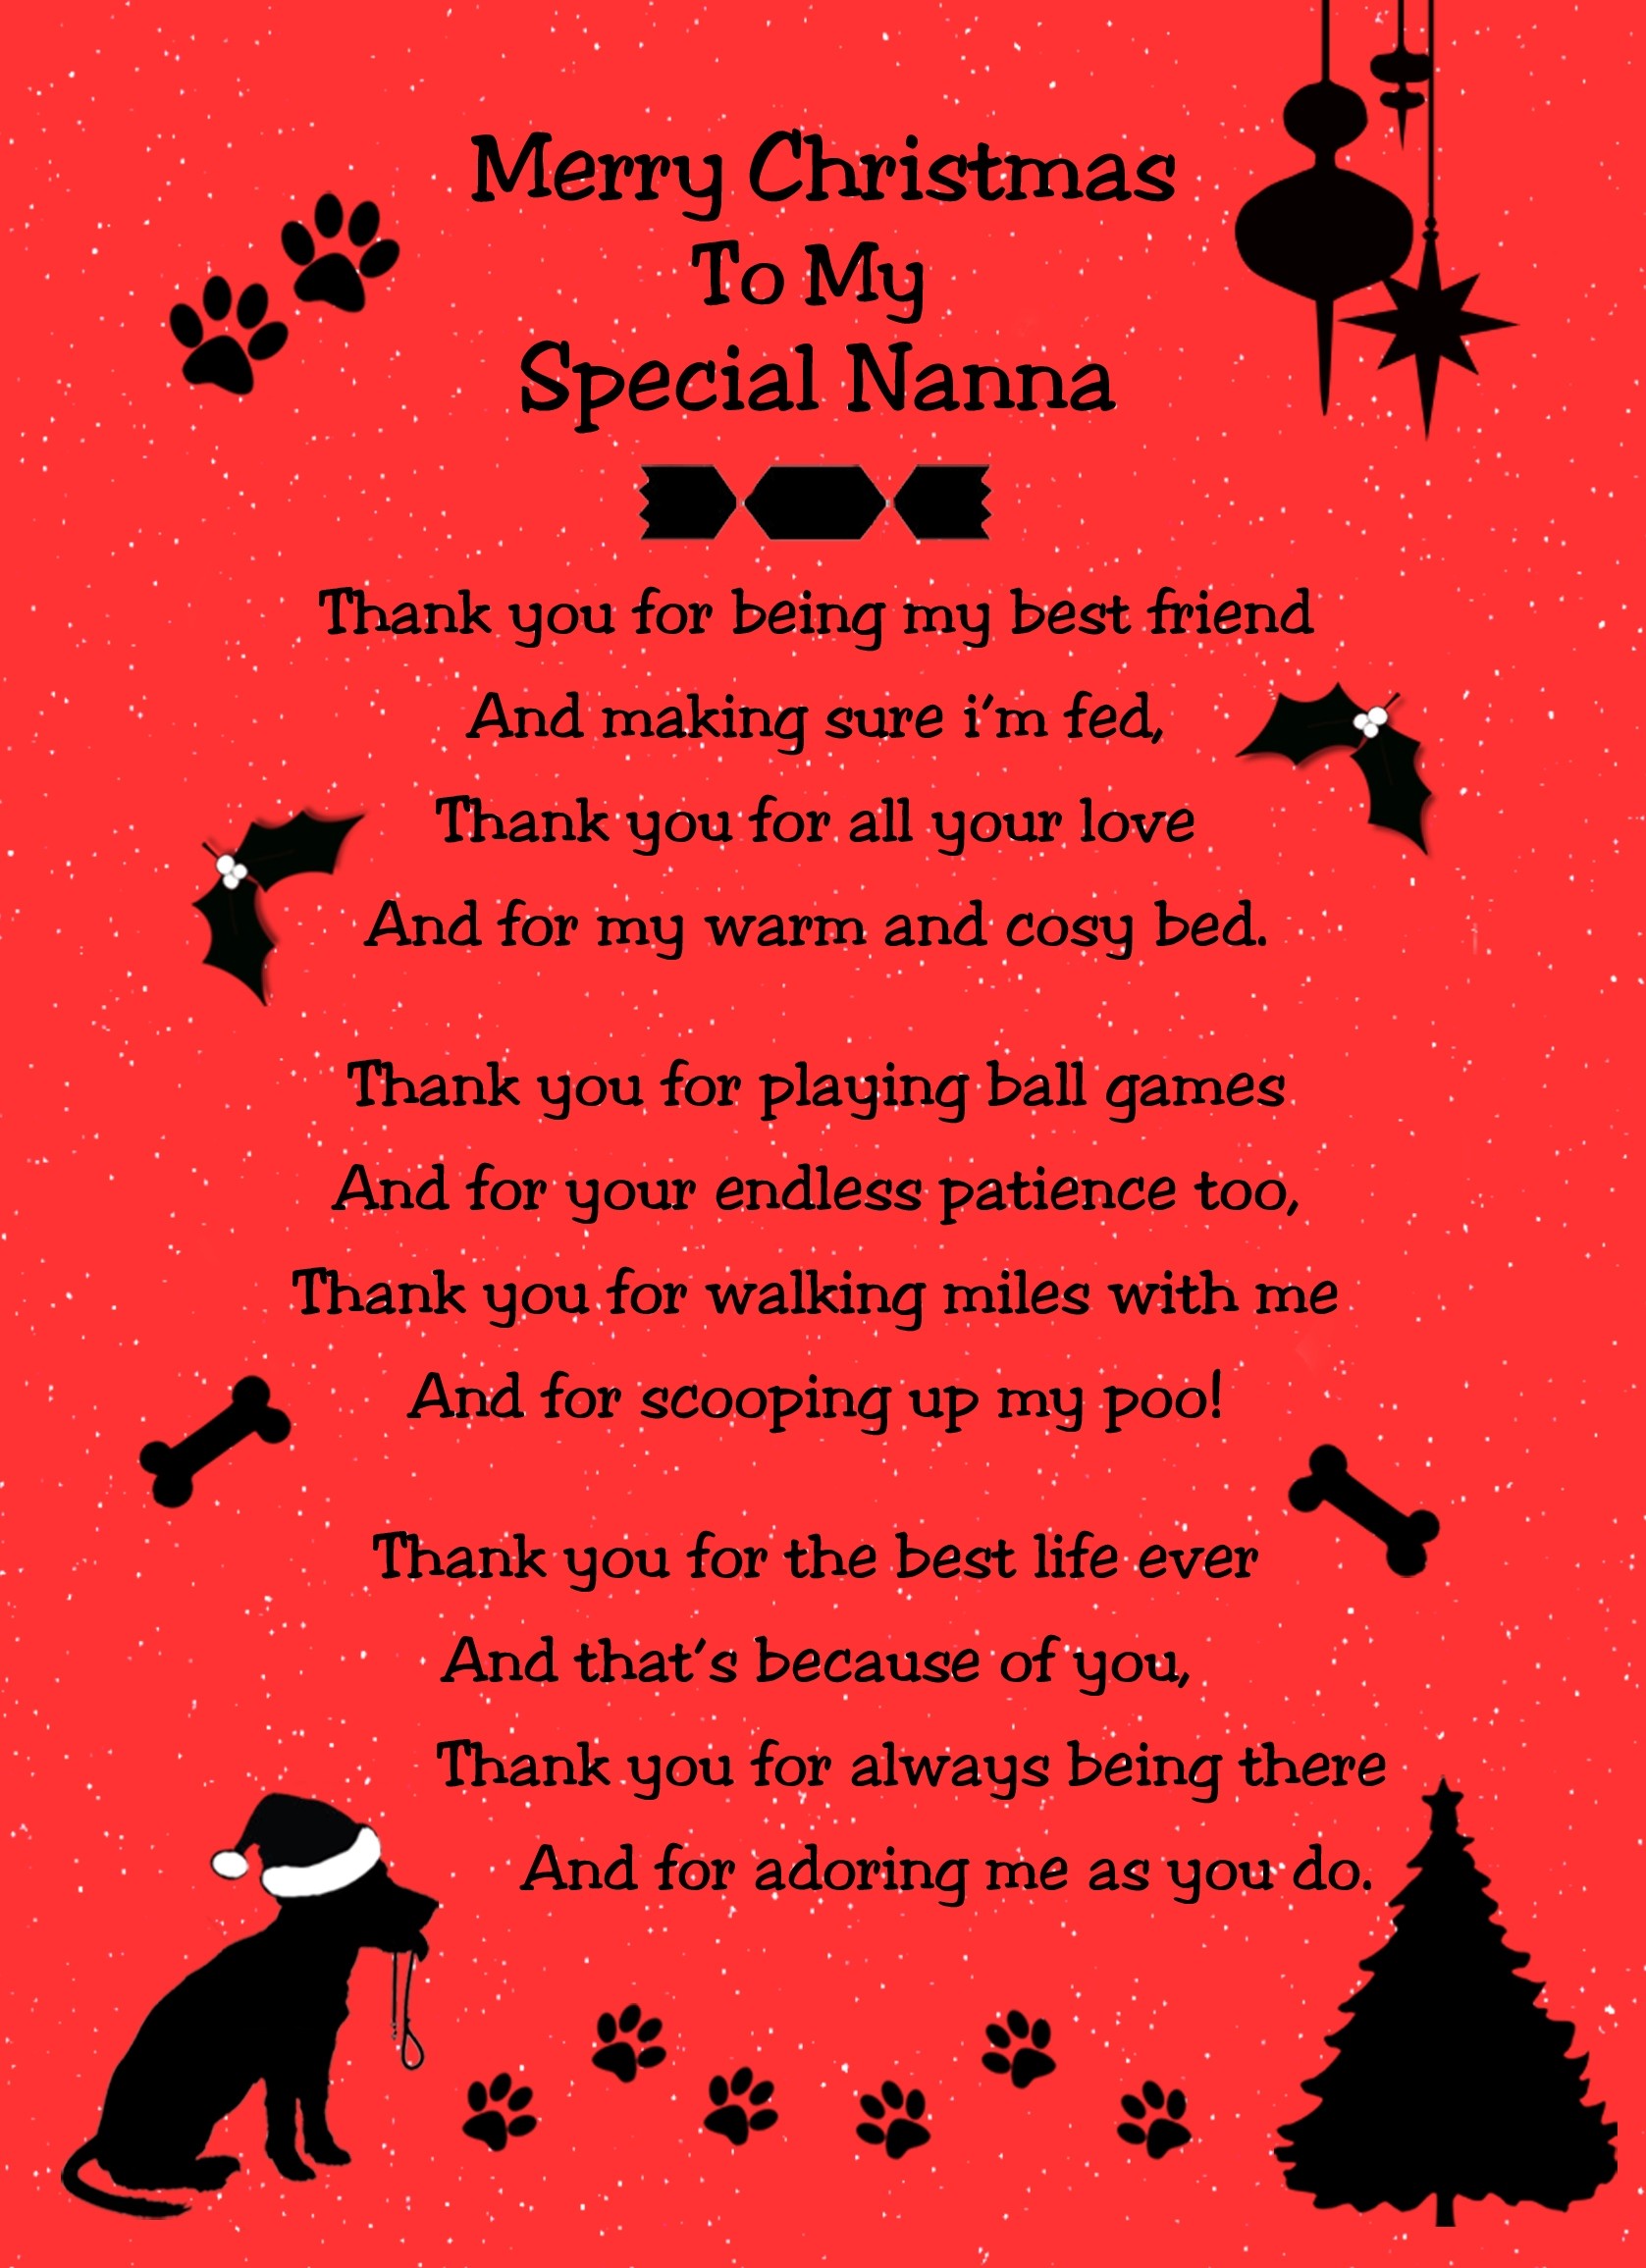 From The Dog Verse Poem Christmas Card (Special Nanna, Red, Merry Christmas)